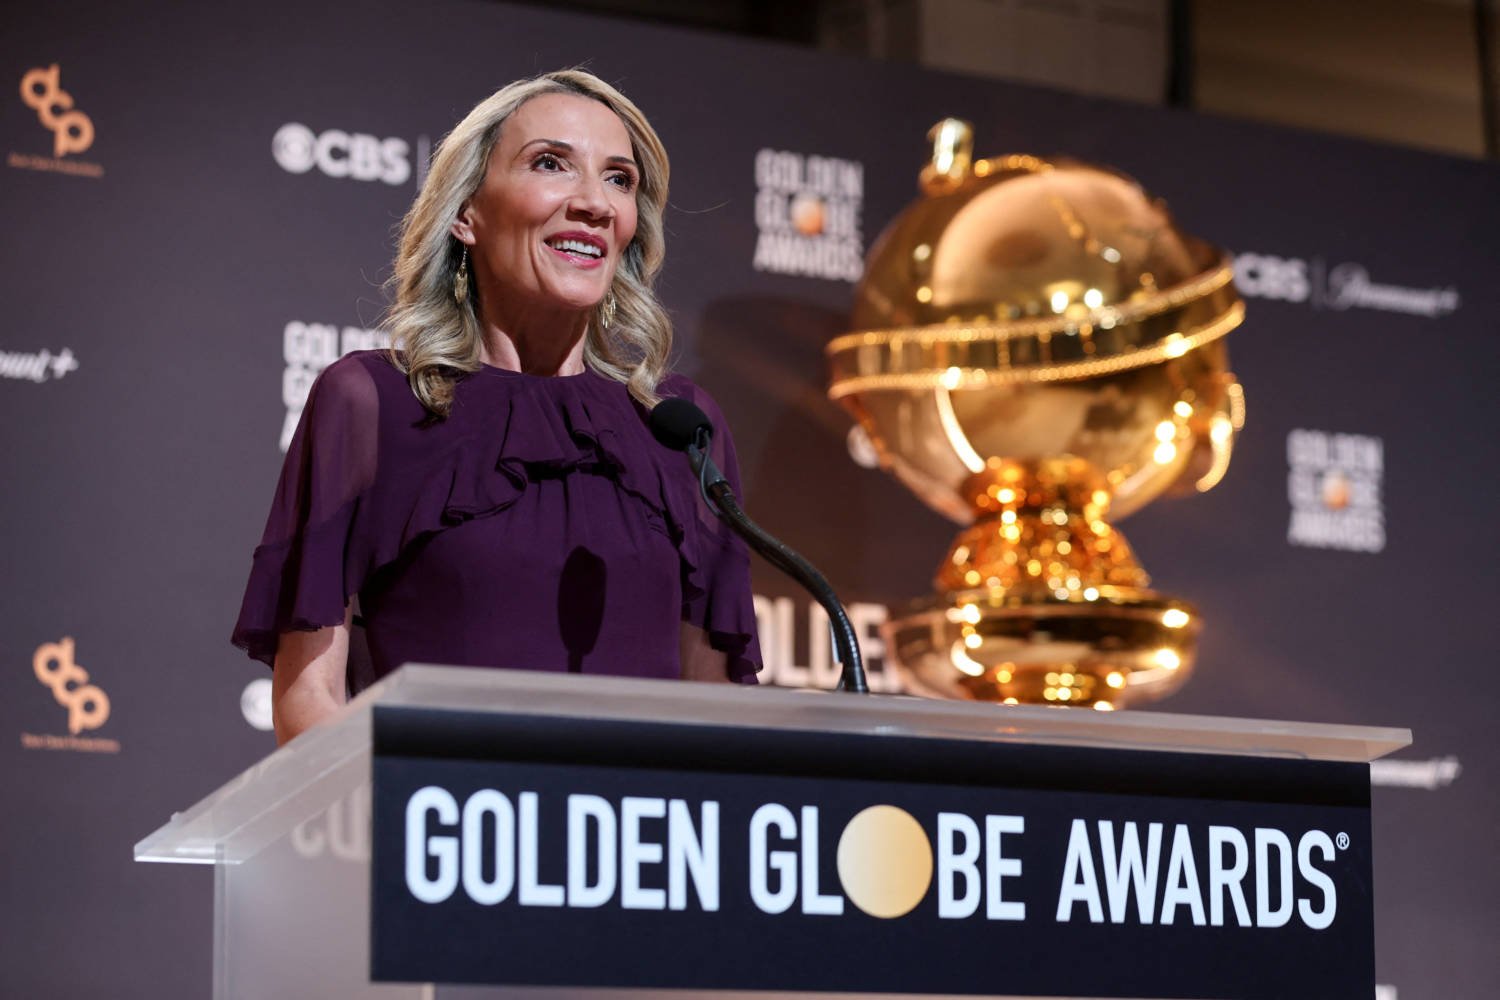 Nominations For The 81st Golden Globe Awards, In Beverly Hills